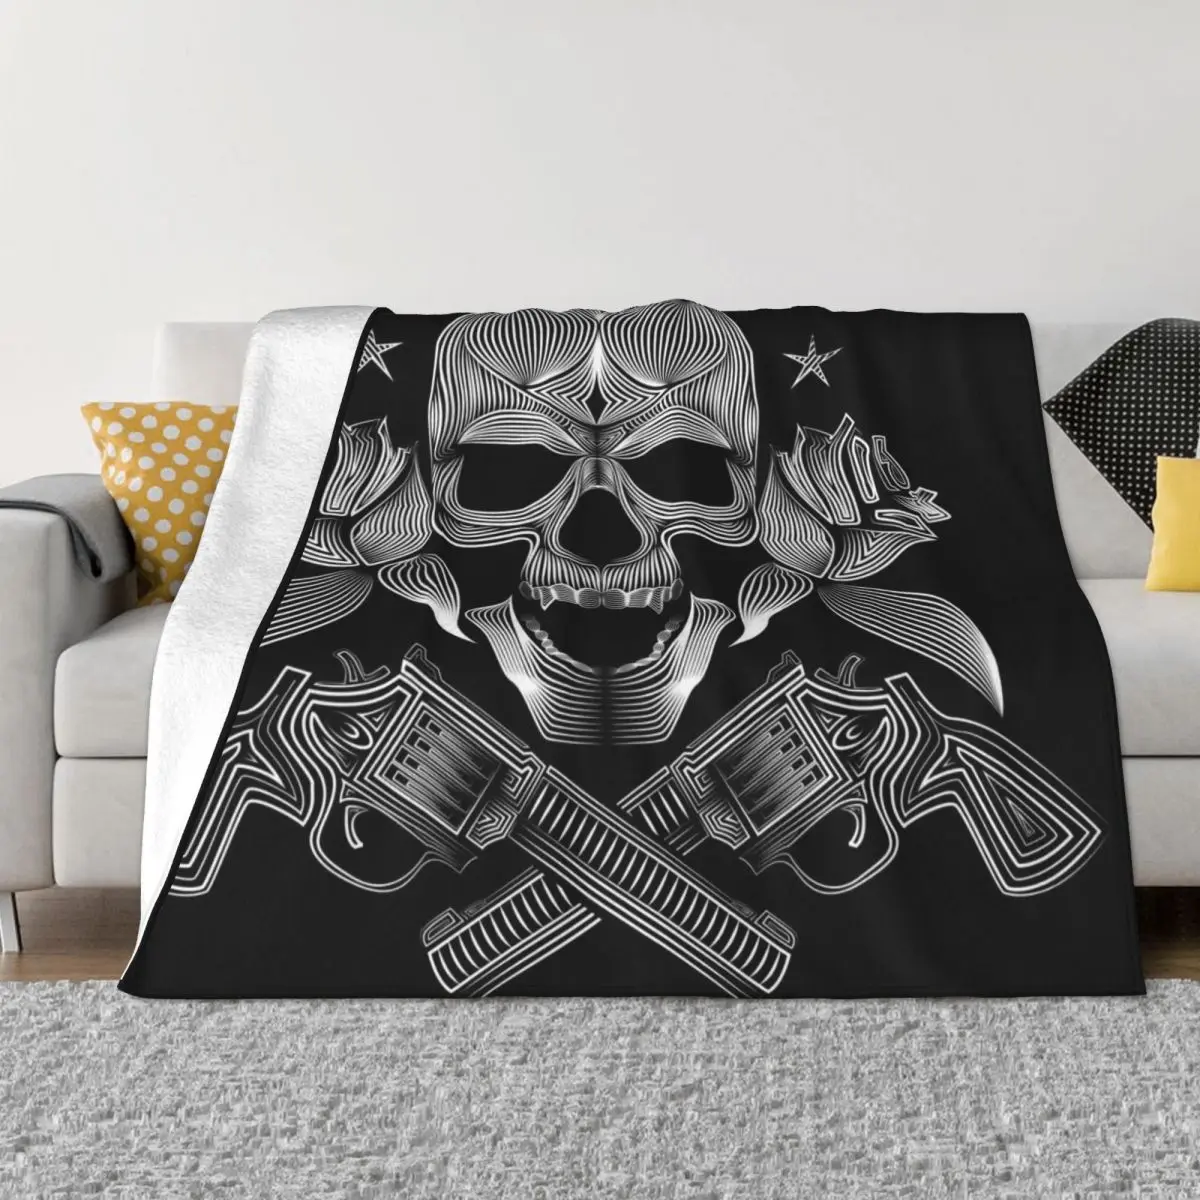 

Guns N Roses Plaid Blanket Flannel Printed Hot Movie Cartoon Multi-function Soft Throw Blankets for Home Car Bedspreads